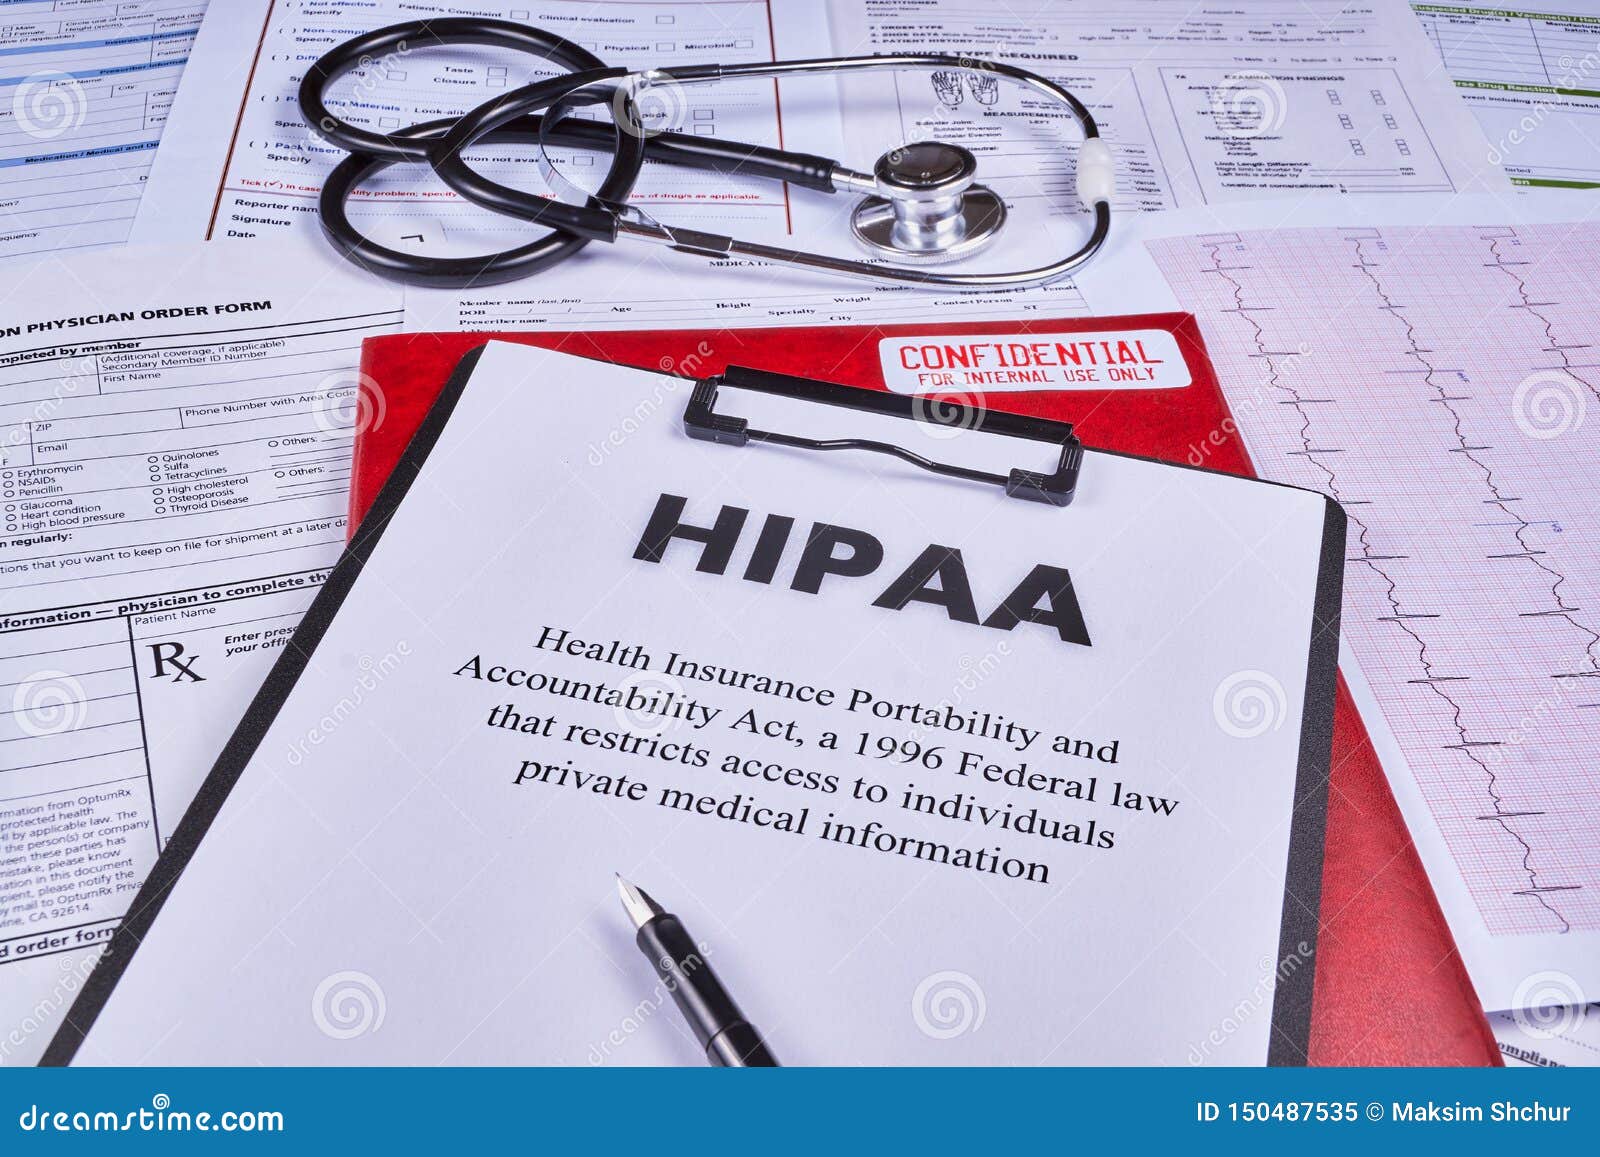 Health Insurance Portability And Accountability Act Stock Image - Image of employer, list: 150487535